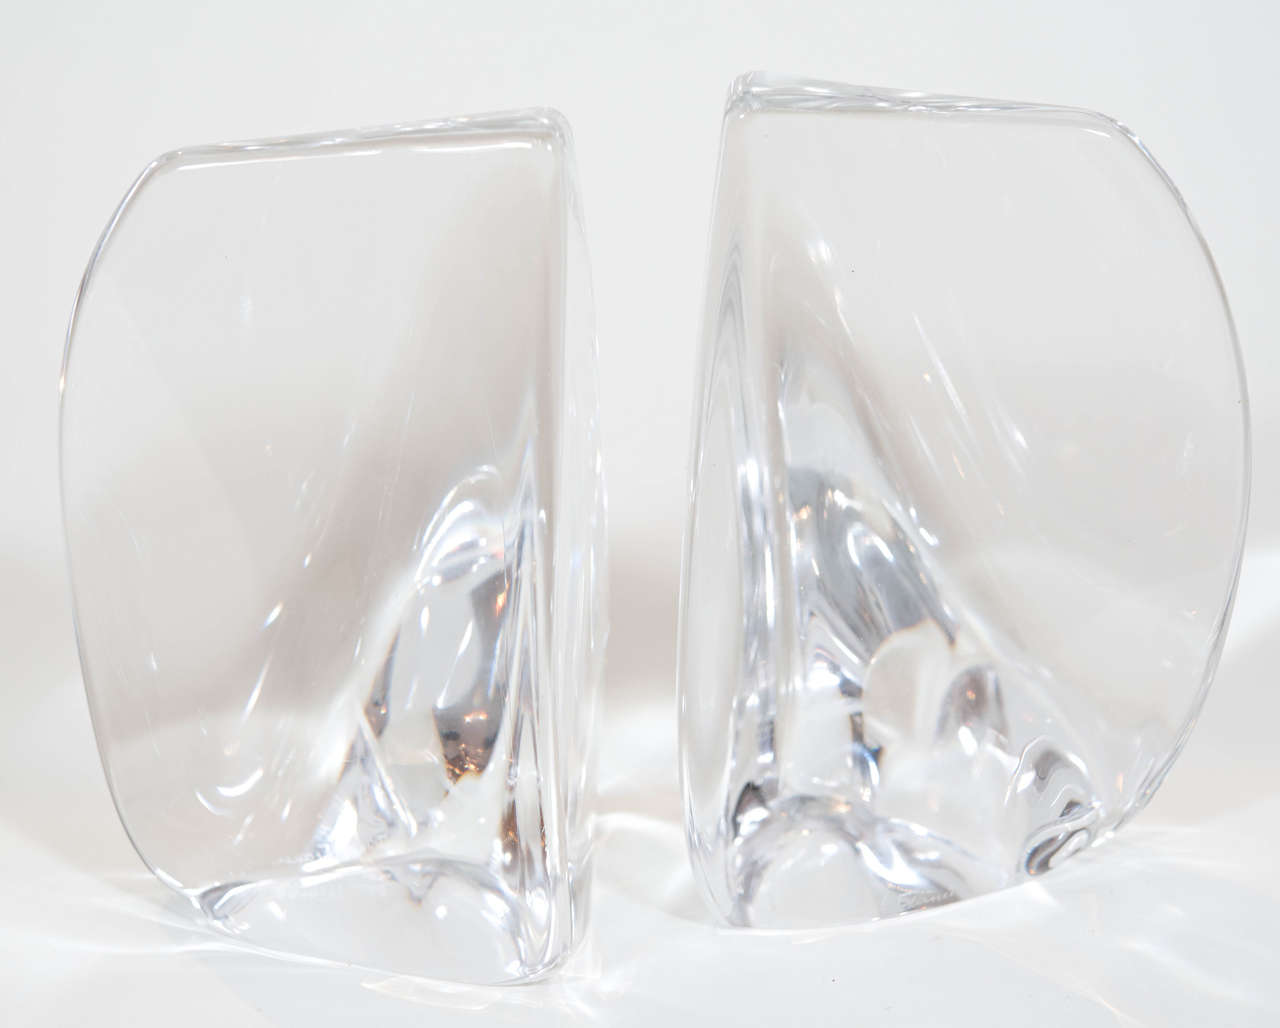 A lovely par of signed Daum glass sculptural-organic shaped bookends from France!